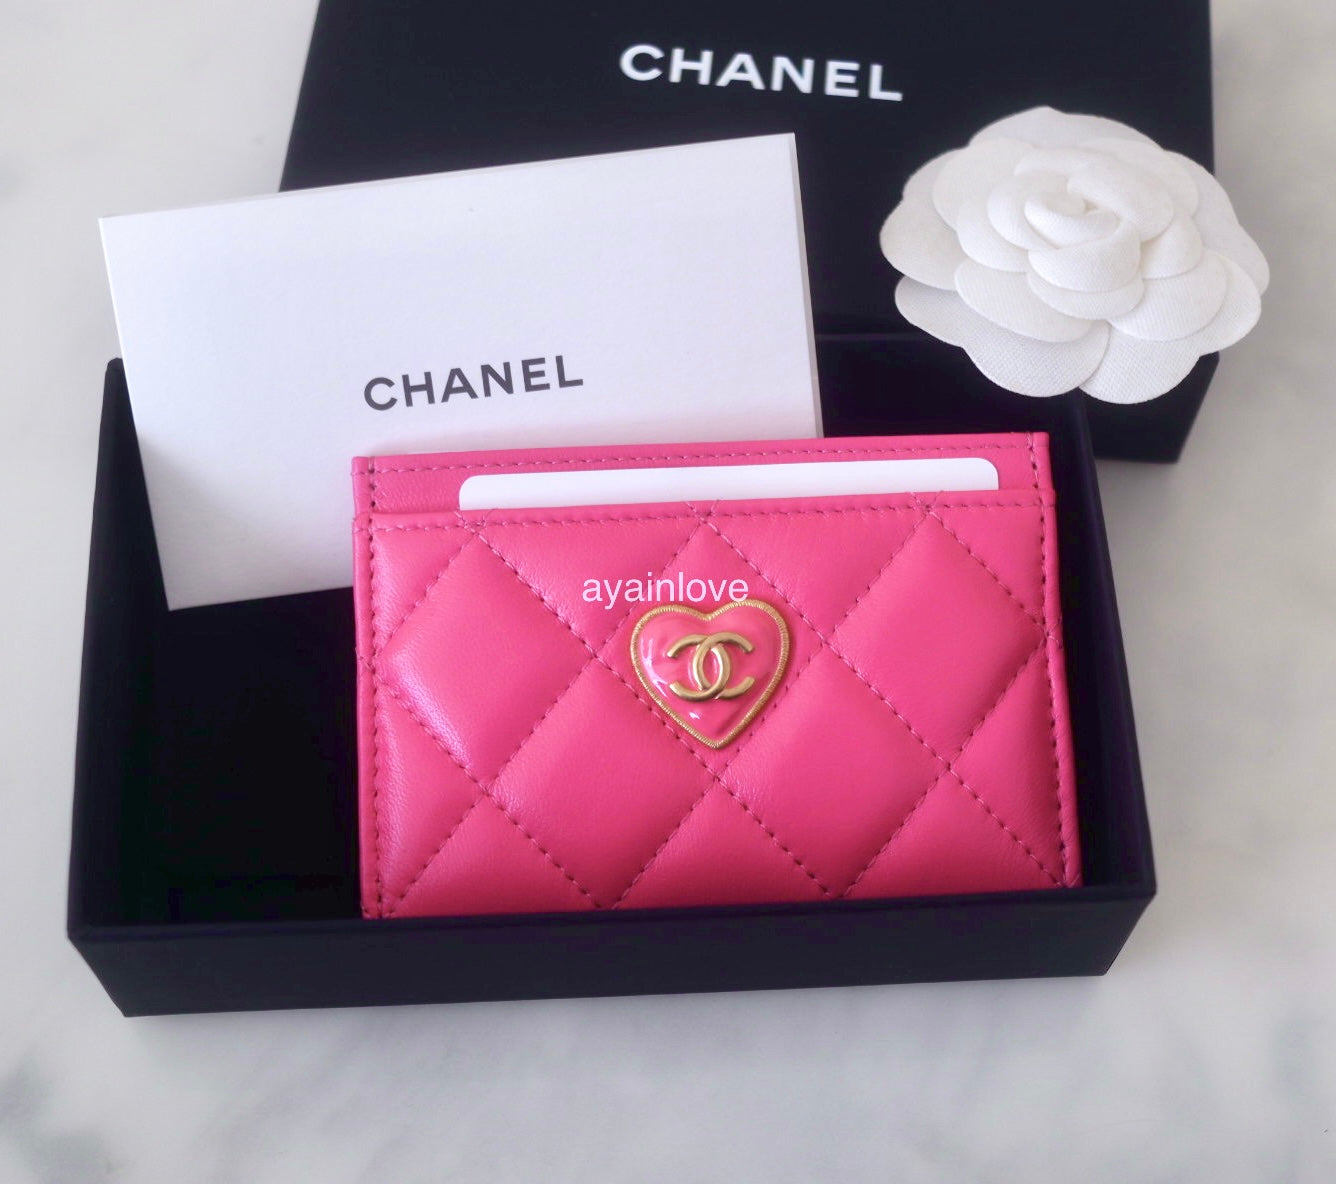 CHANEL, Accessories, Chanel Cardholder Wallet